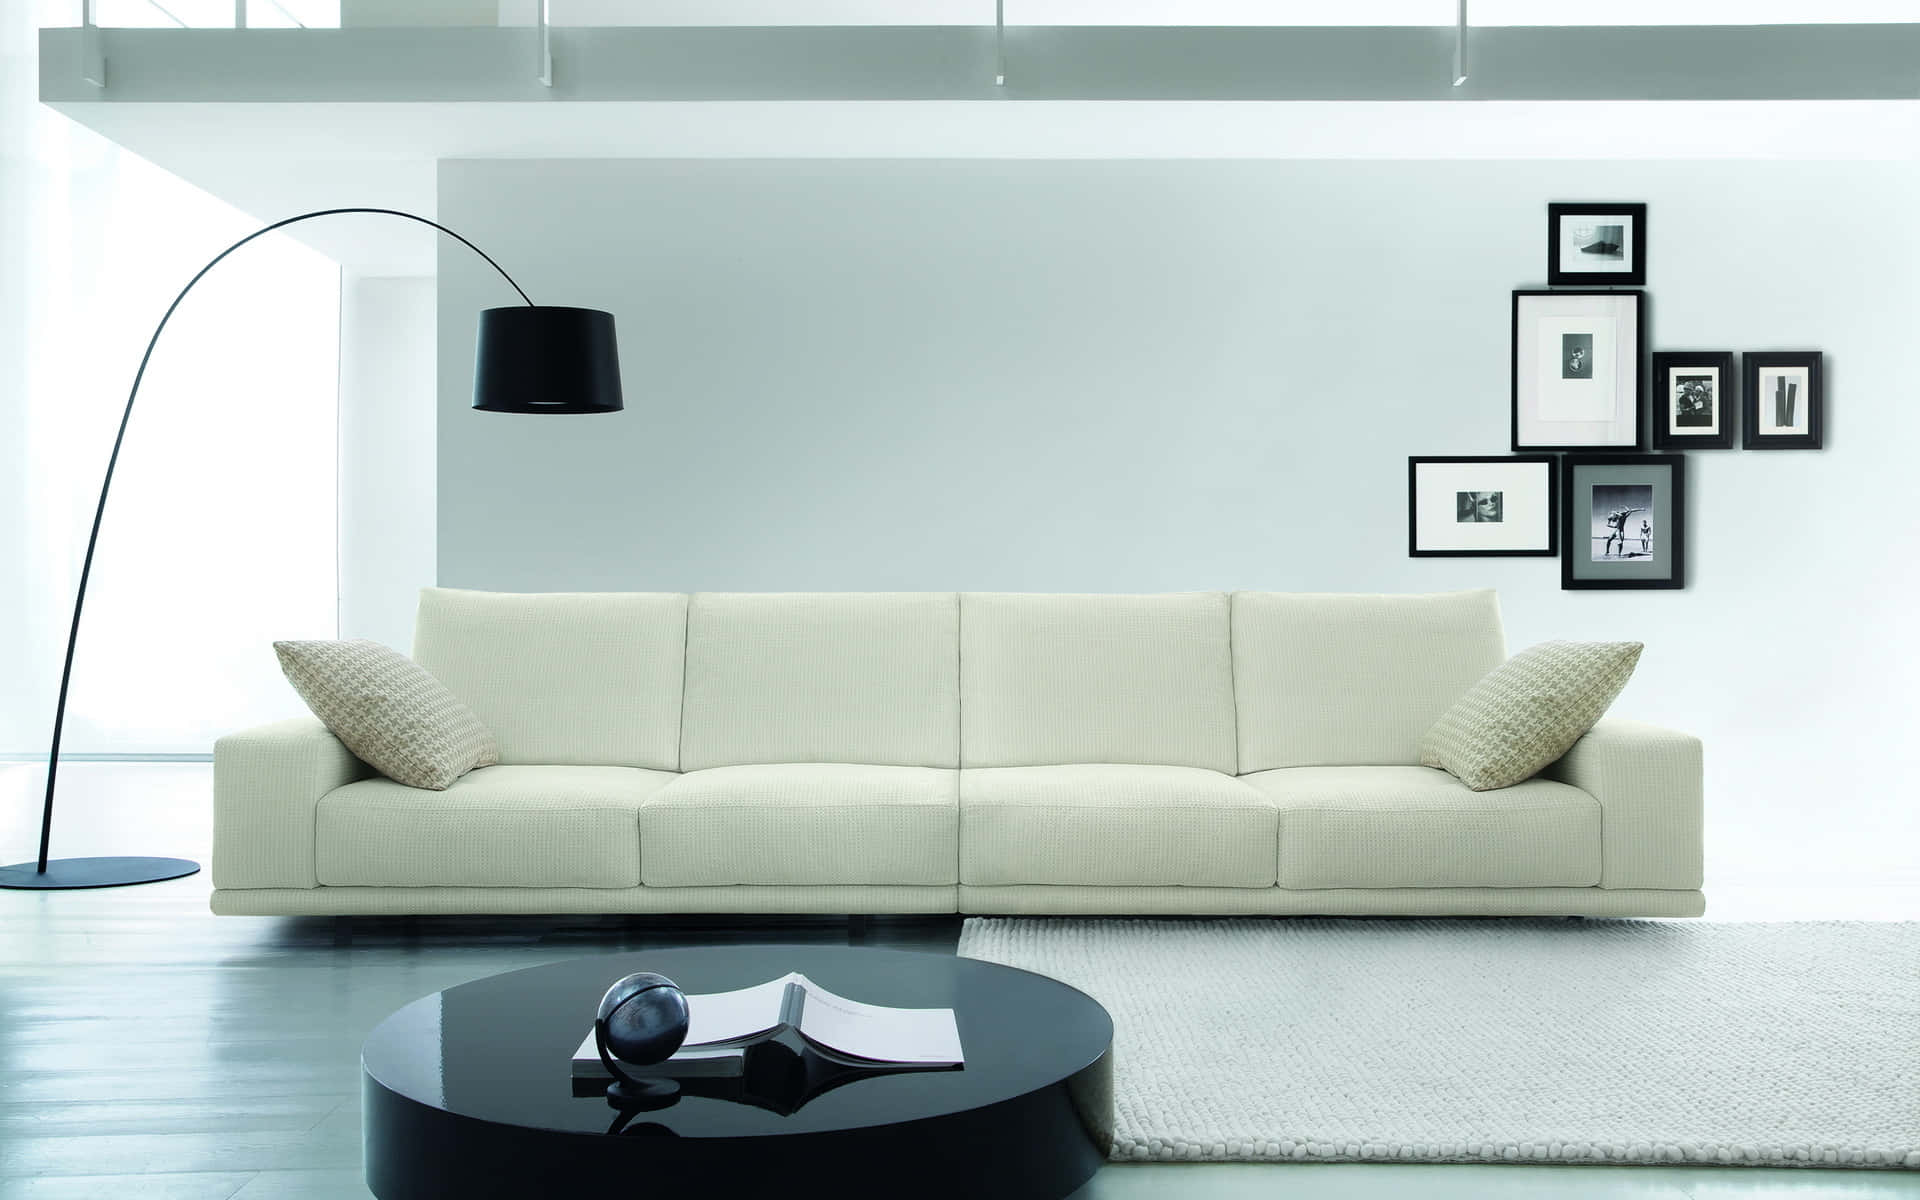 Minimalistic Long White Couch in a Modern Living Room Wallpaper